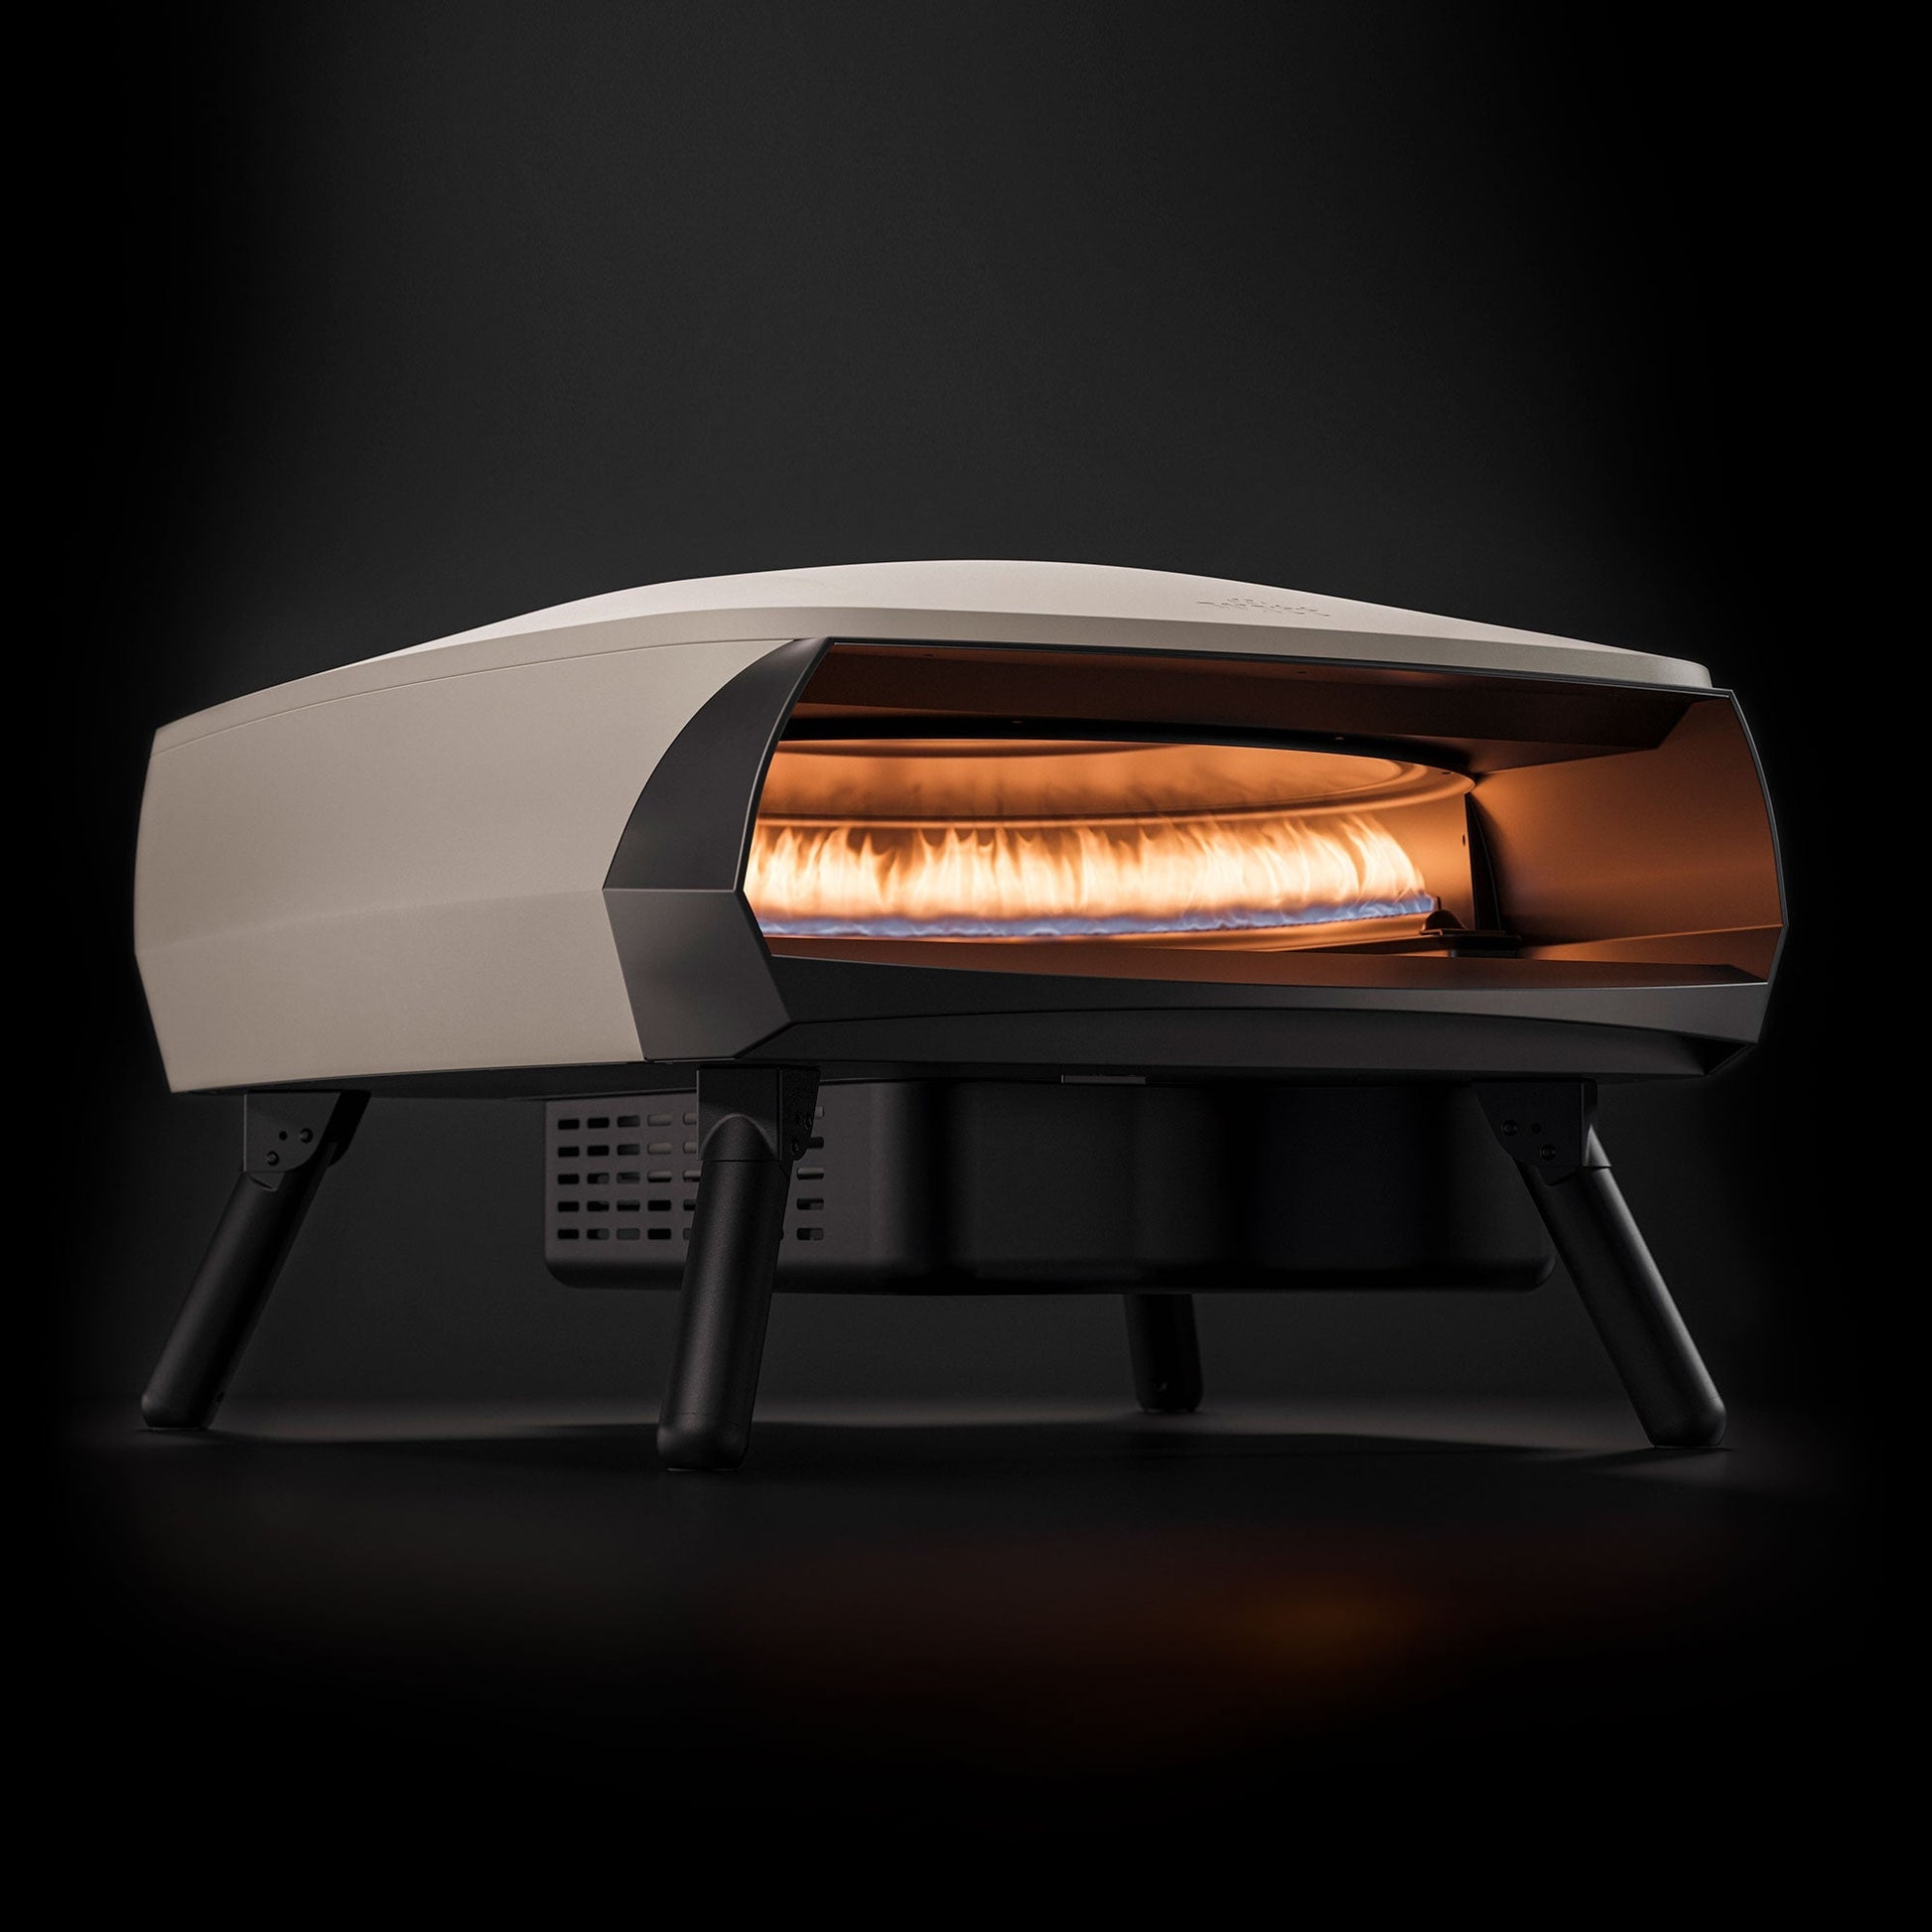 Witt ETNA Fermo Award Winning Pizza Oven - Traditional Pizza Baking - Rapid 500°C Heating, 40.5cm Capacity, 60-Second Cooking, Even Heat Distribution plus FREE Gift